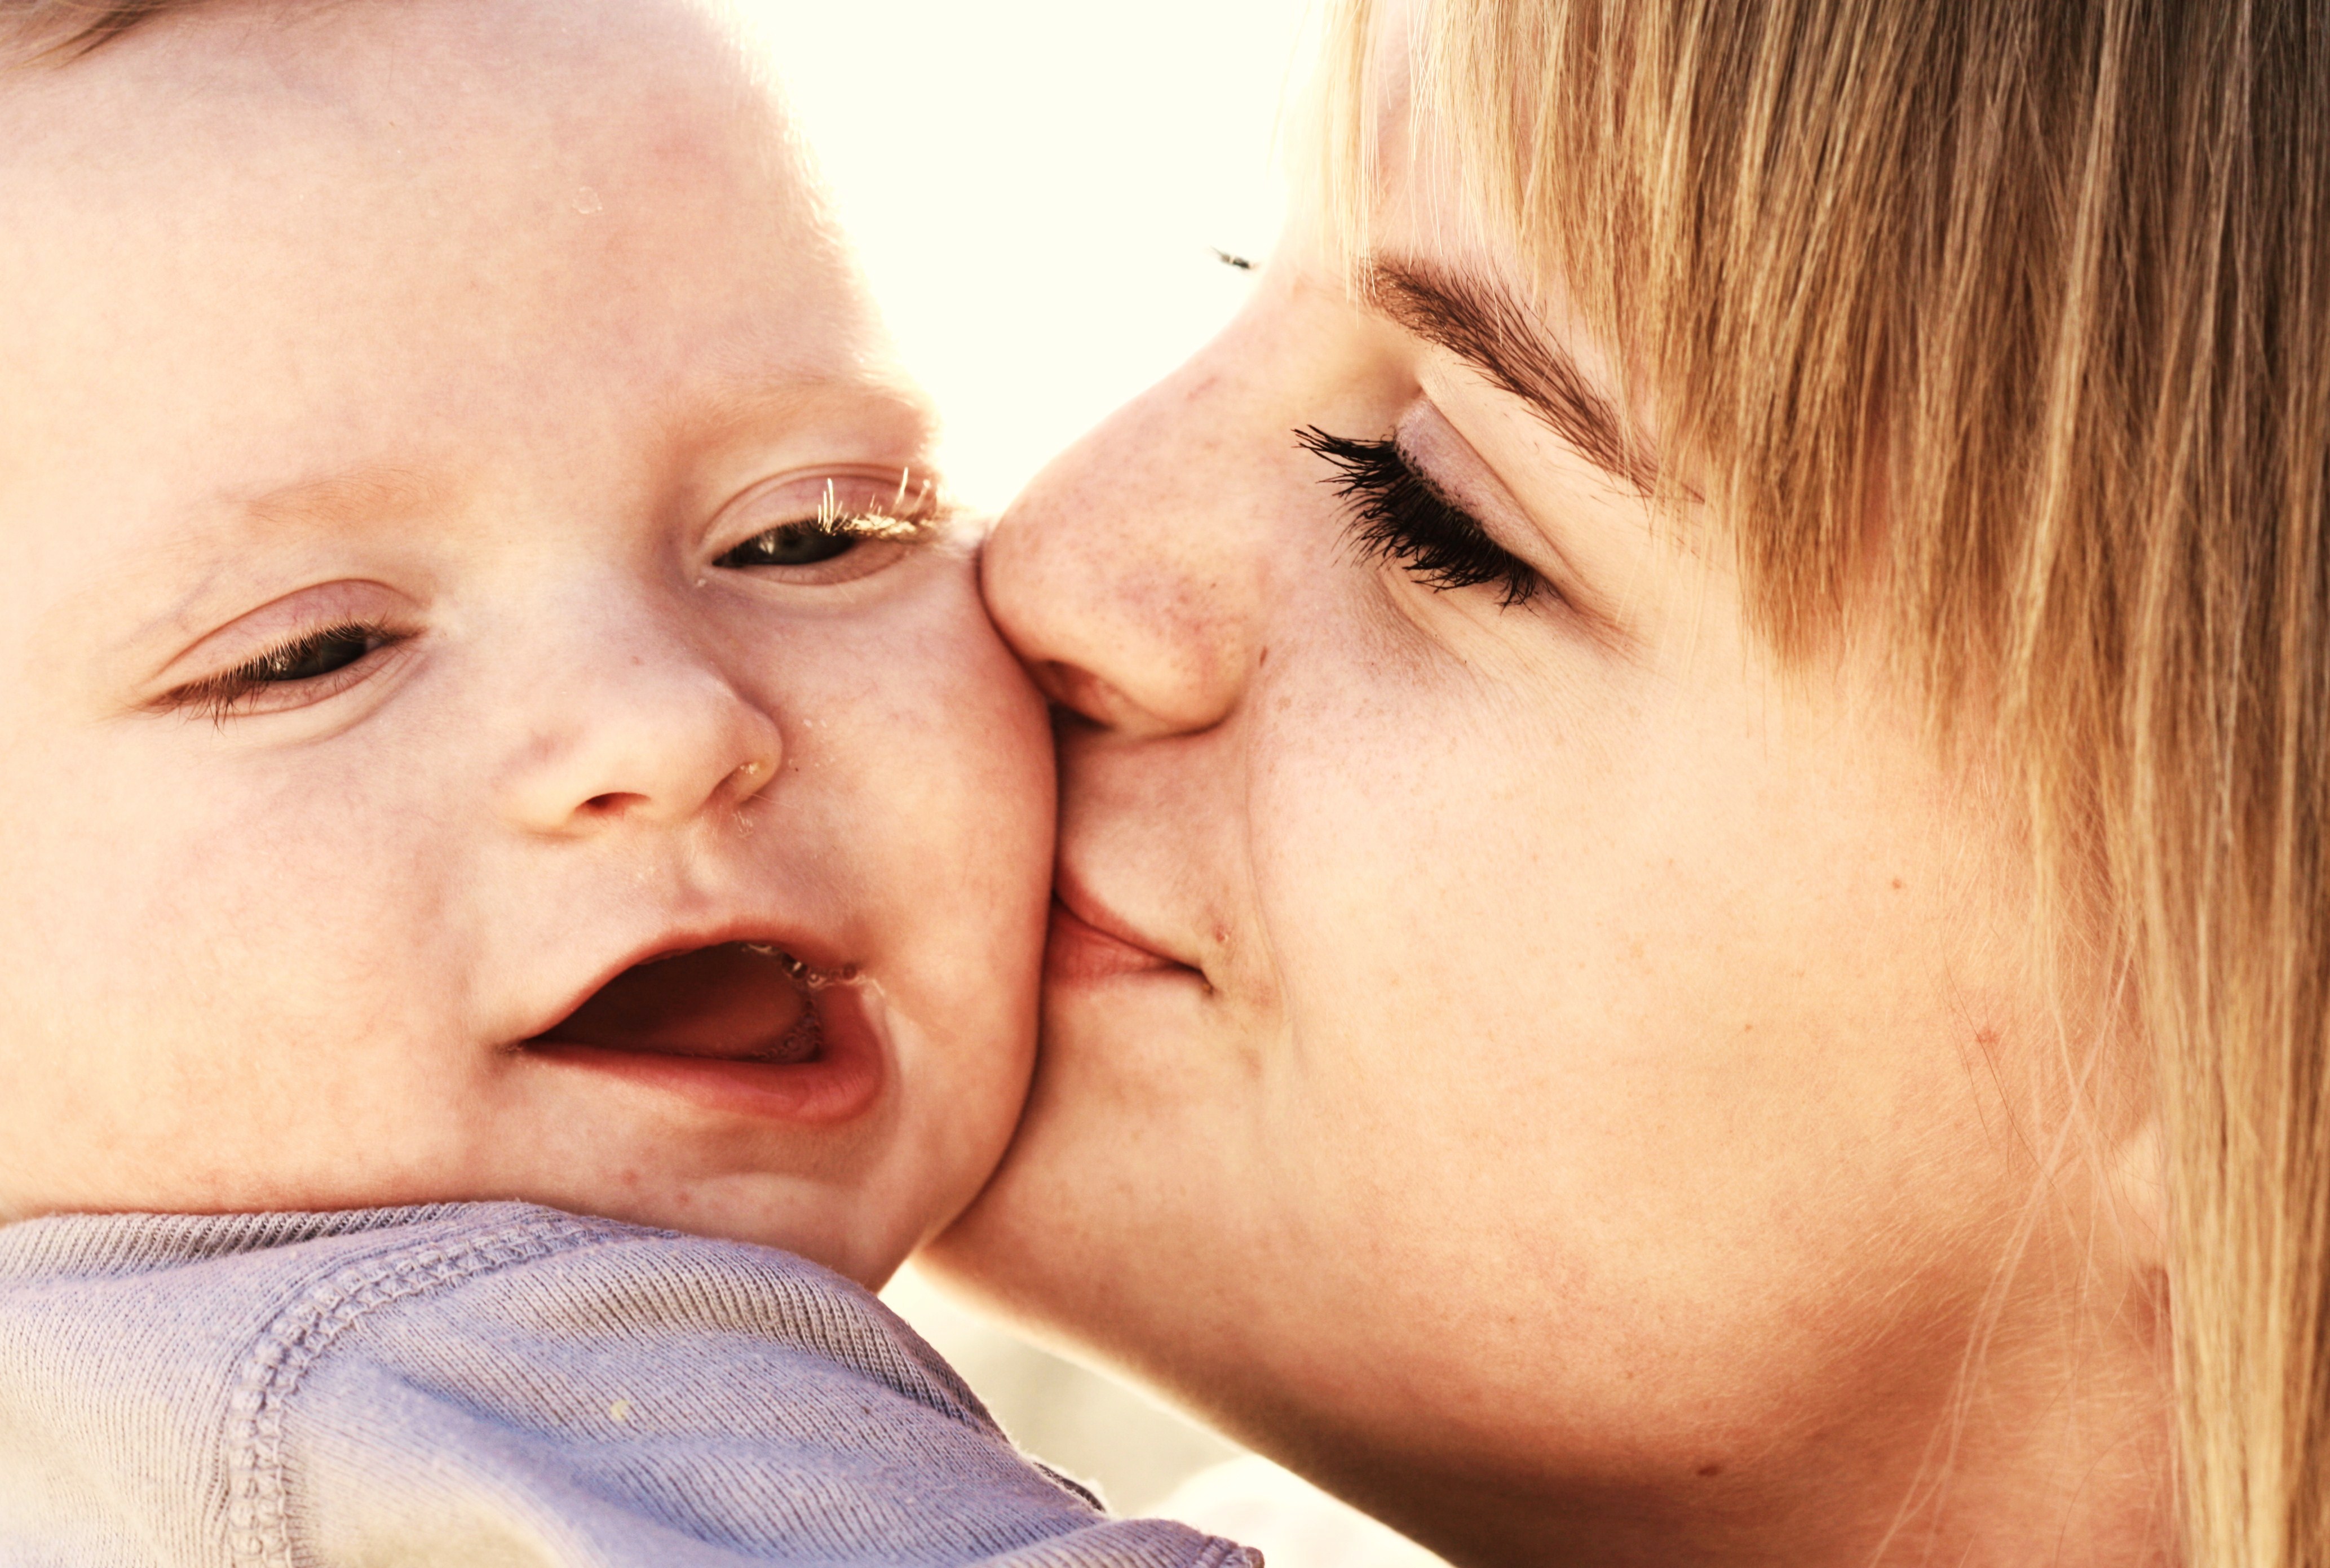 Woman kissing a baby on the cheek